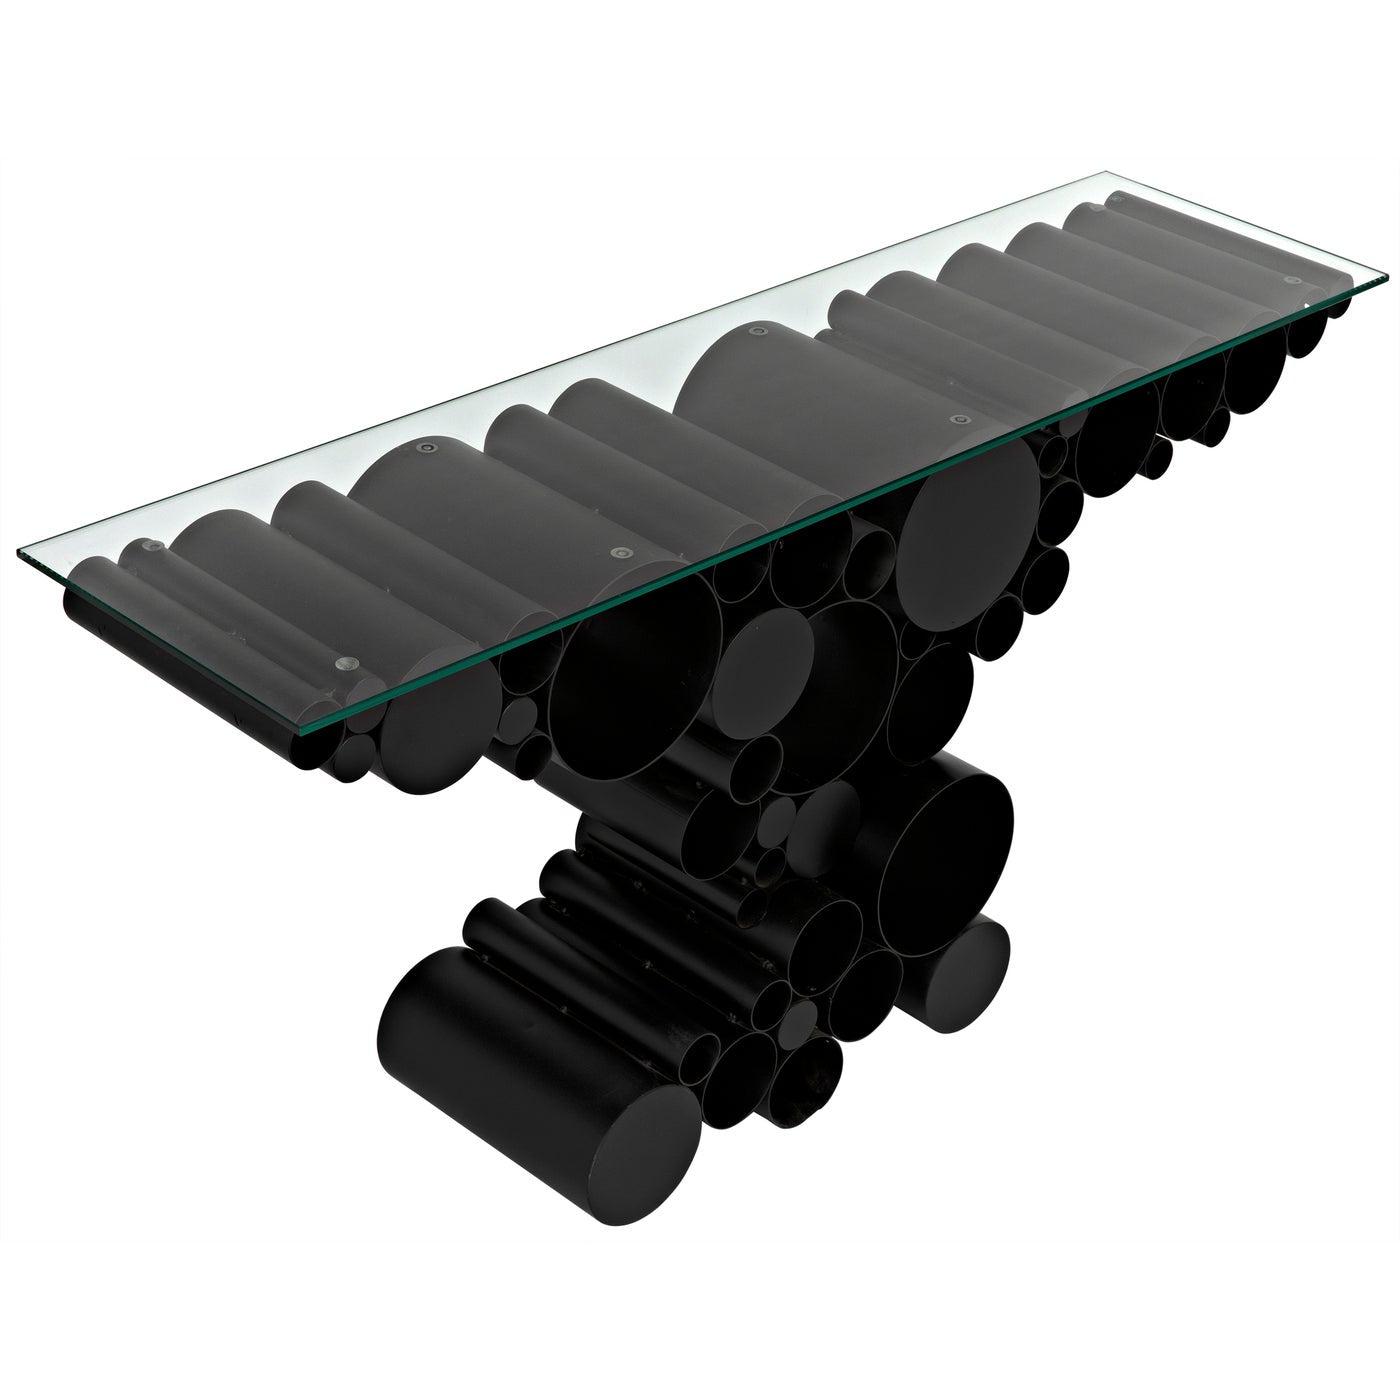 Noir Paradox Console, Black Steel with Glass Top-Noir Furniture-Blue Hand Home